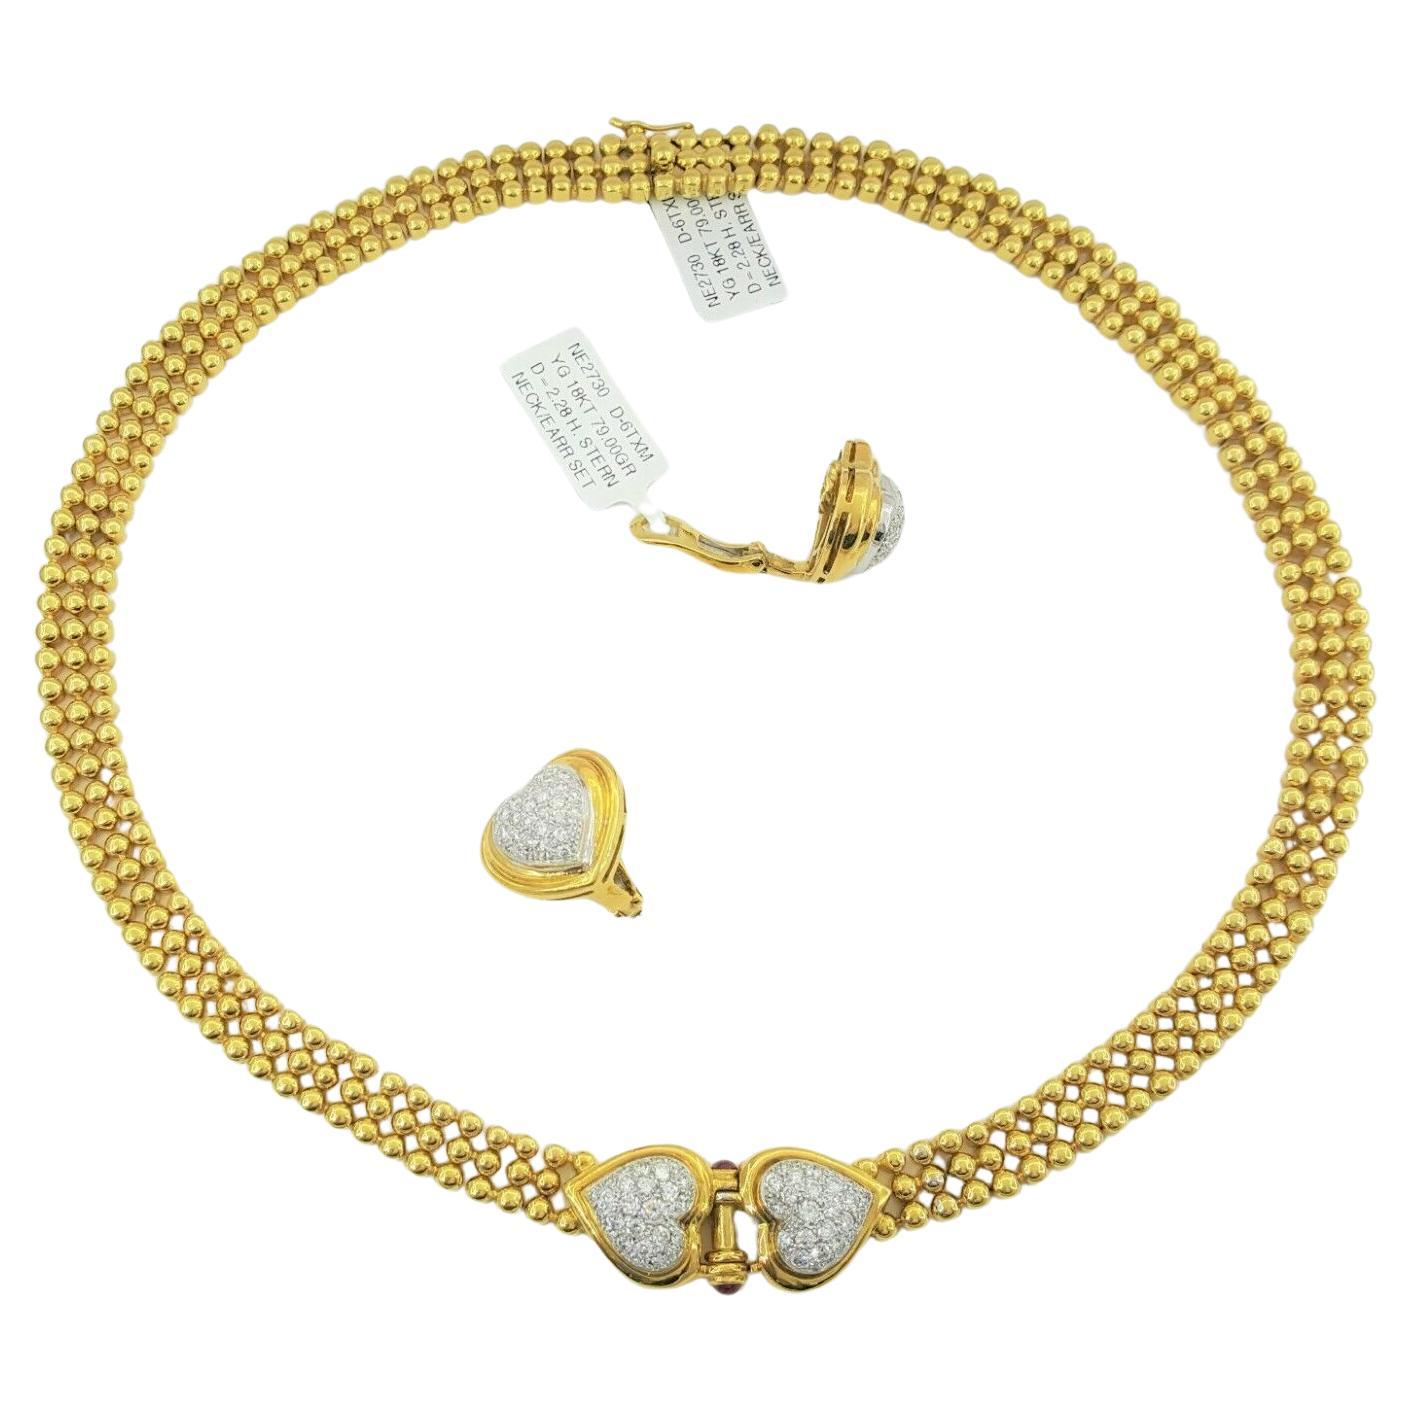 H Stern 64 grams 18 carats yellow gold necklace and earrings For Sale